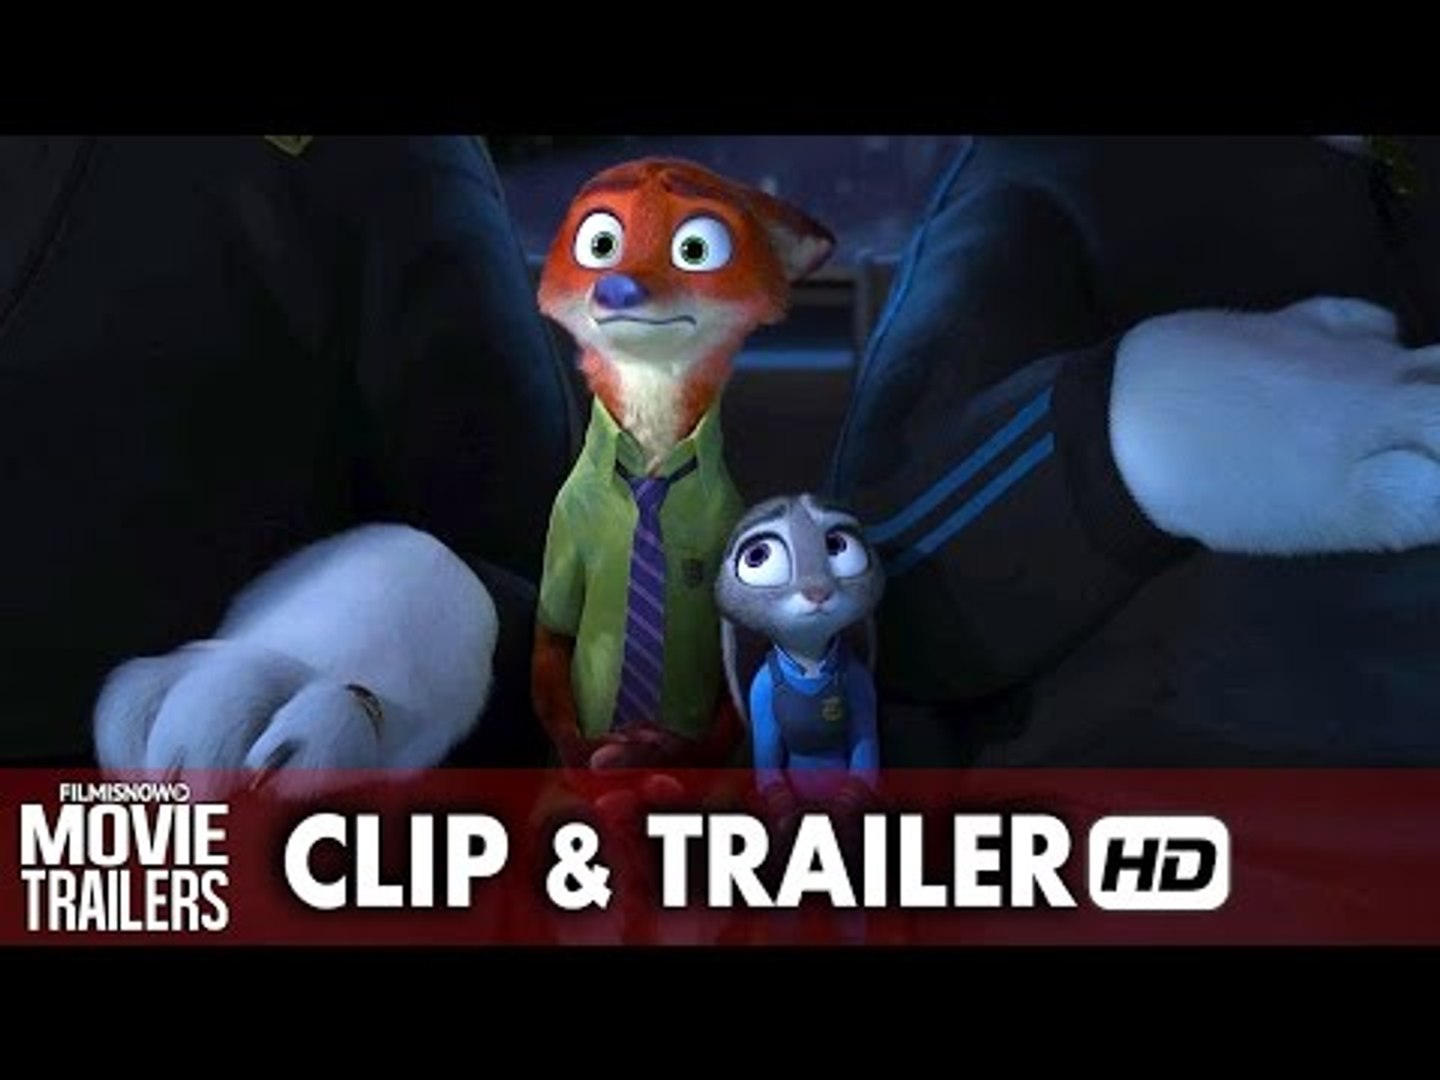 Zootopia with Jason Bateman - Official Trailer 2 - video Dailymotion